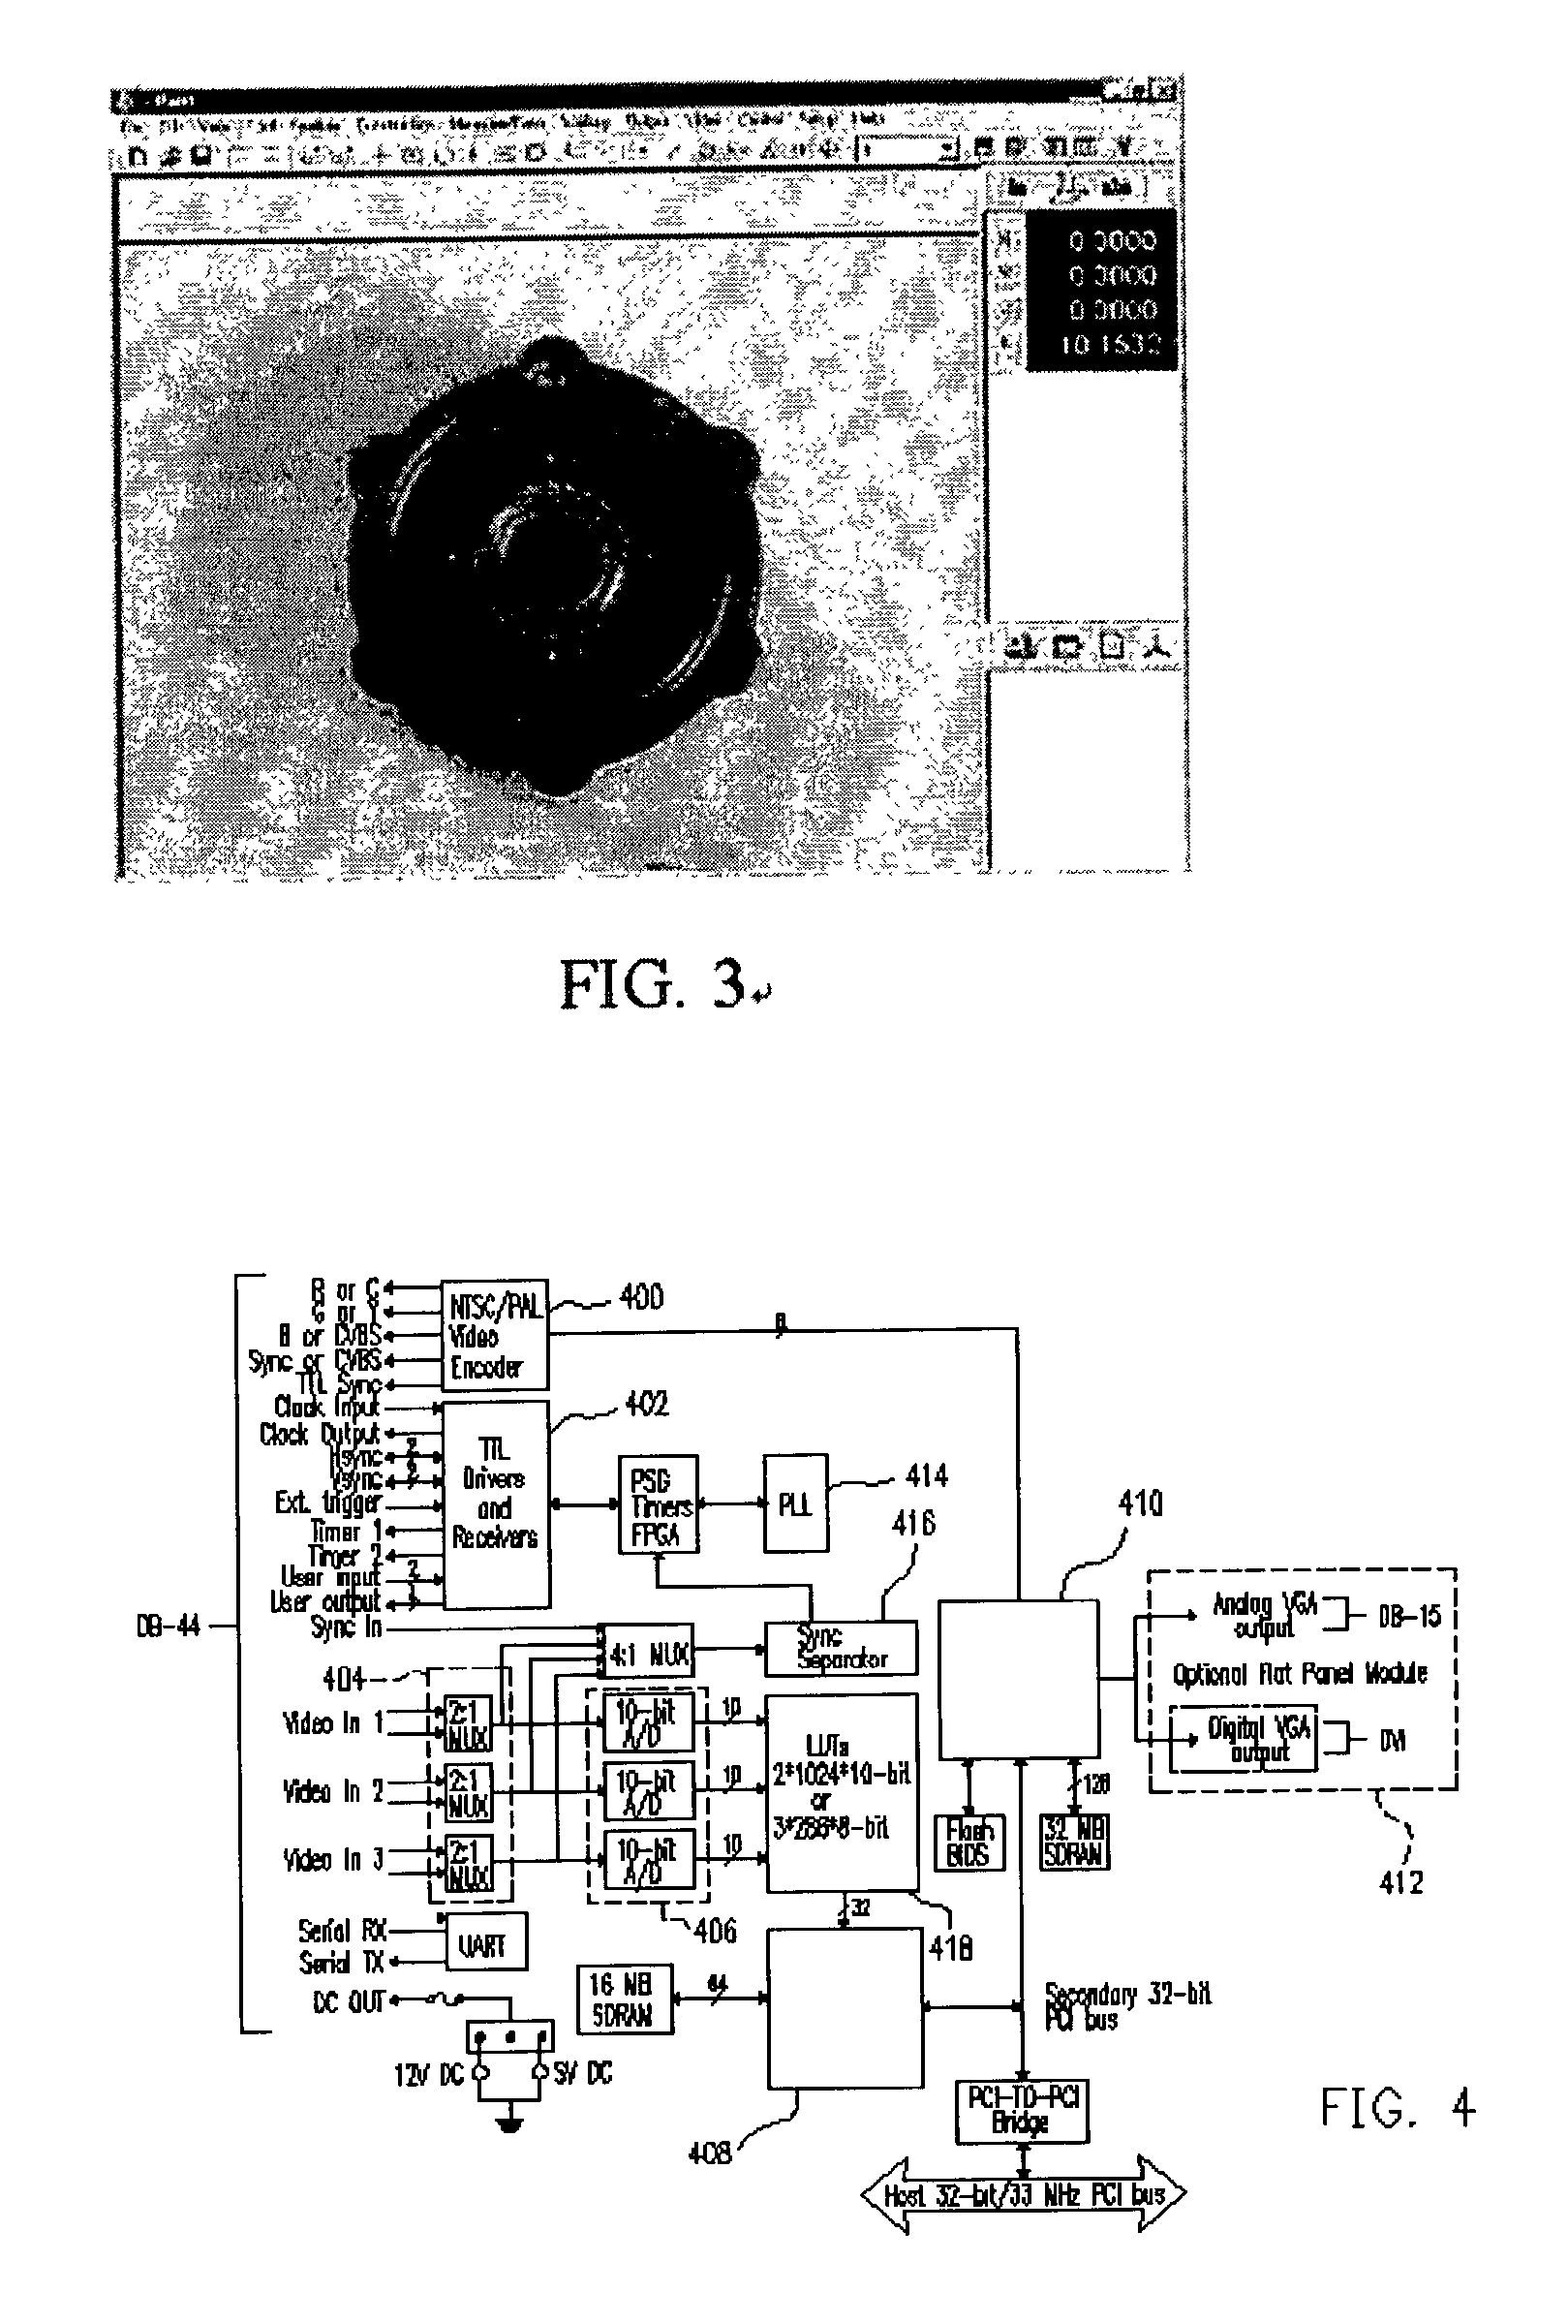 Method and apparatus for video metrology